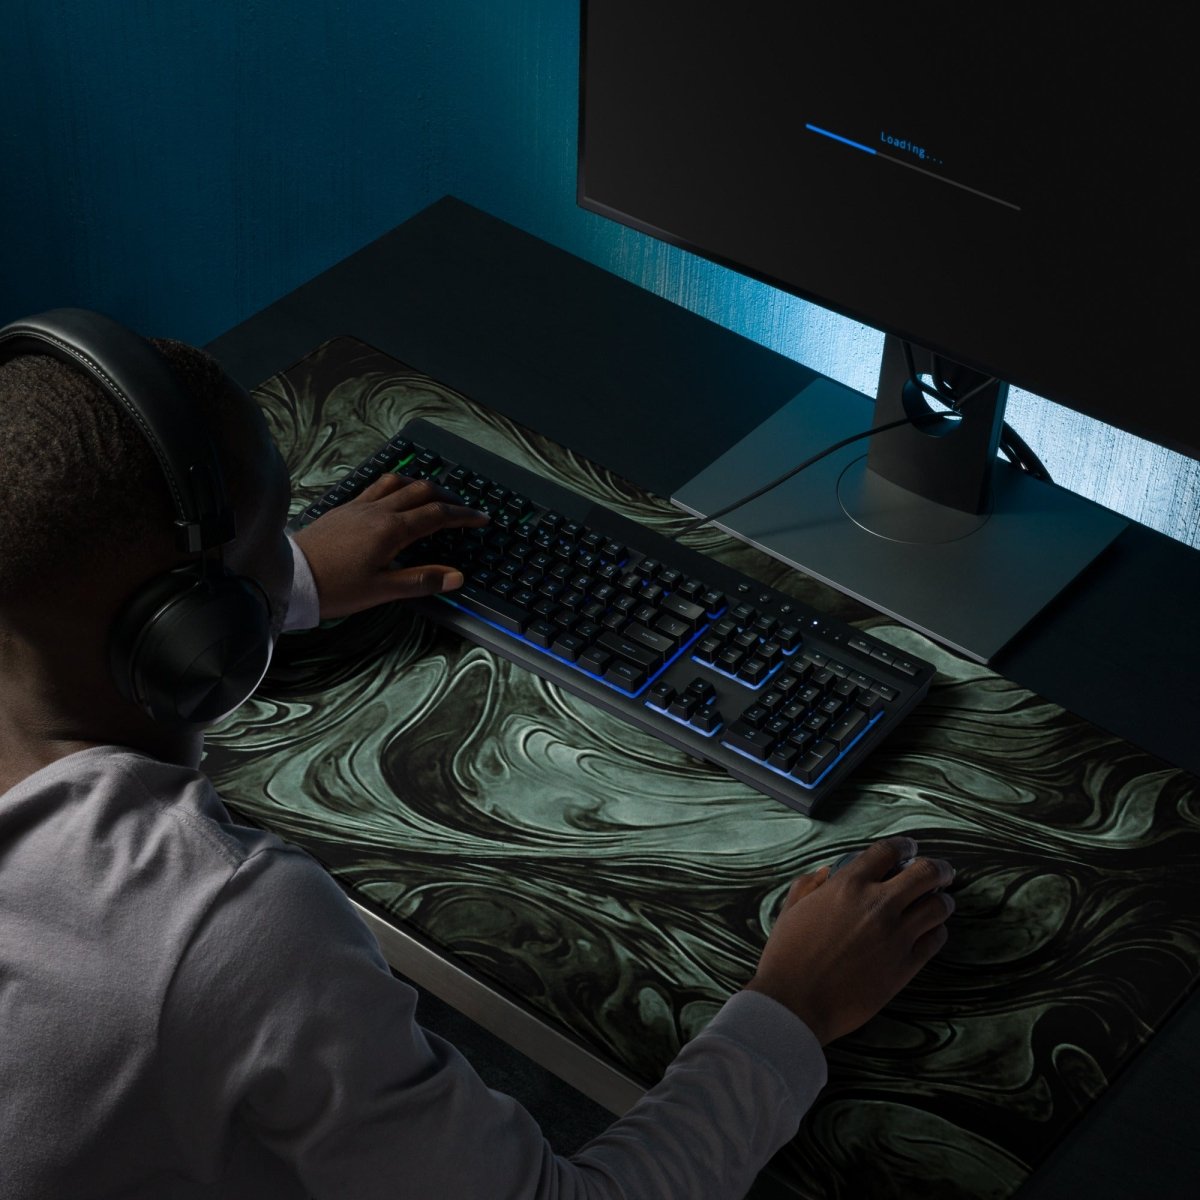 Deep darkness - Gaming mouse pad - Ever colorful